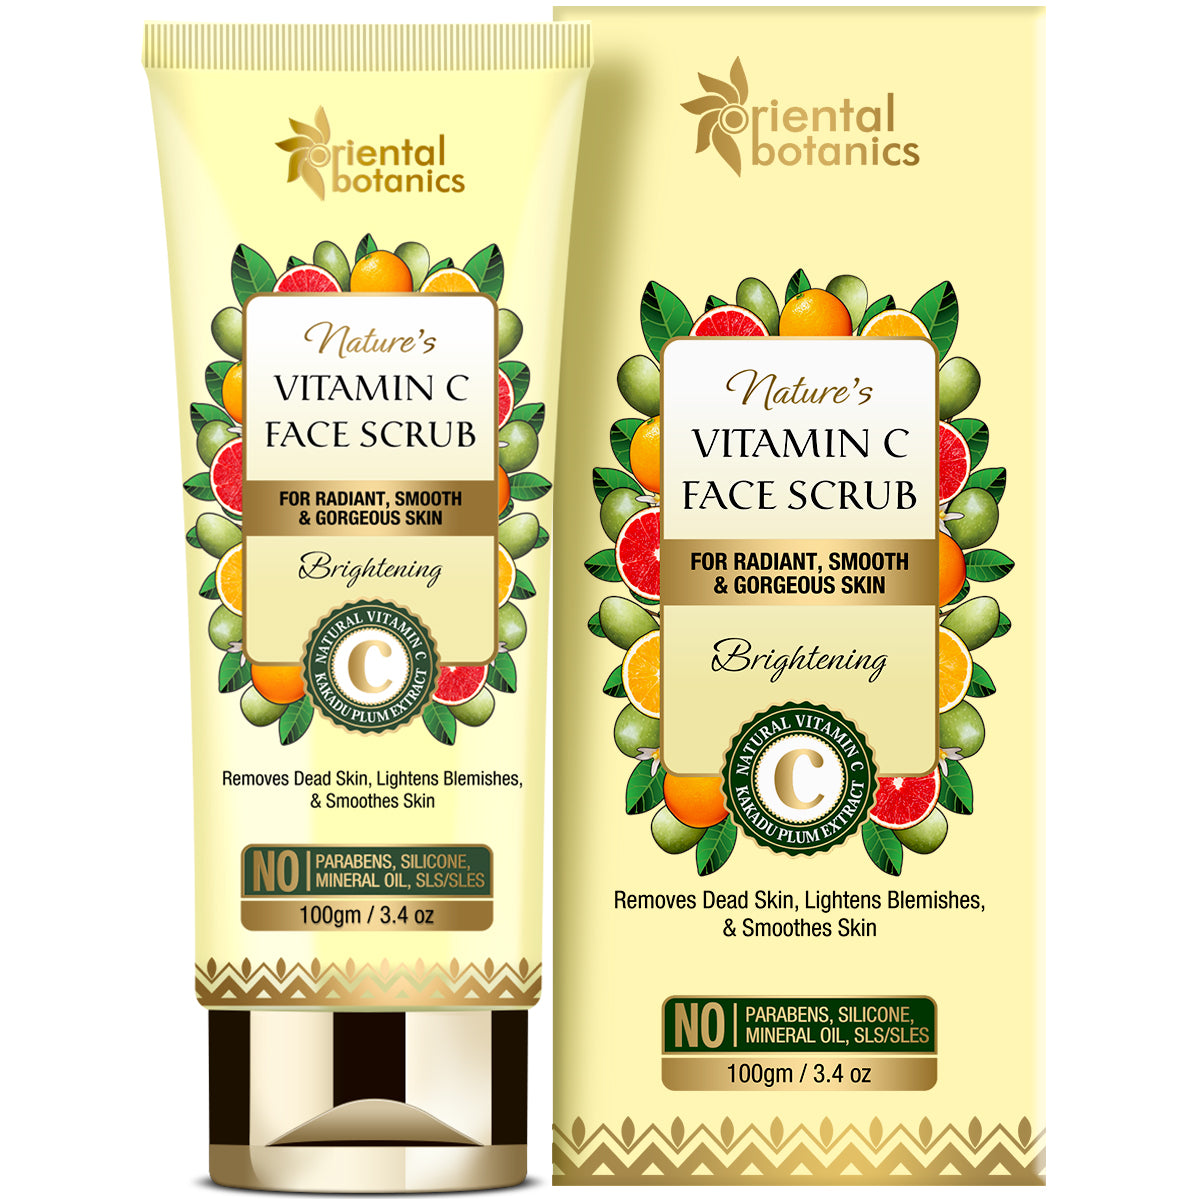 Oriental Botanics Nature's Vitamin C Brightening Face Scrub - With Kakadu Plum - For Radiant, Smooth and Gorgeous Skin - No Parabens, Silicone, Mineral Oils, 100 g